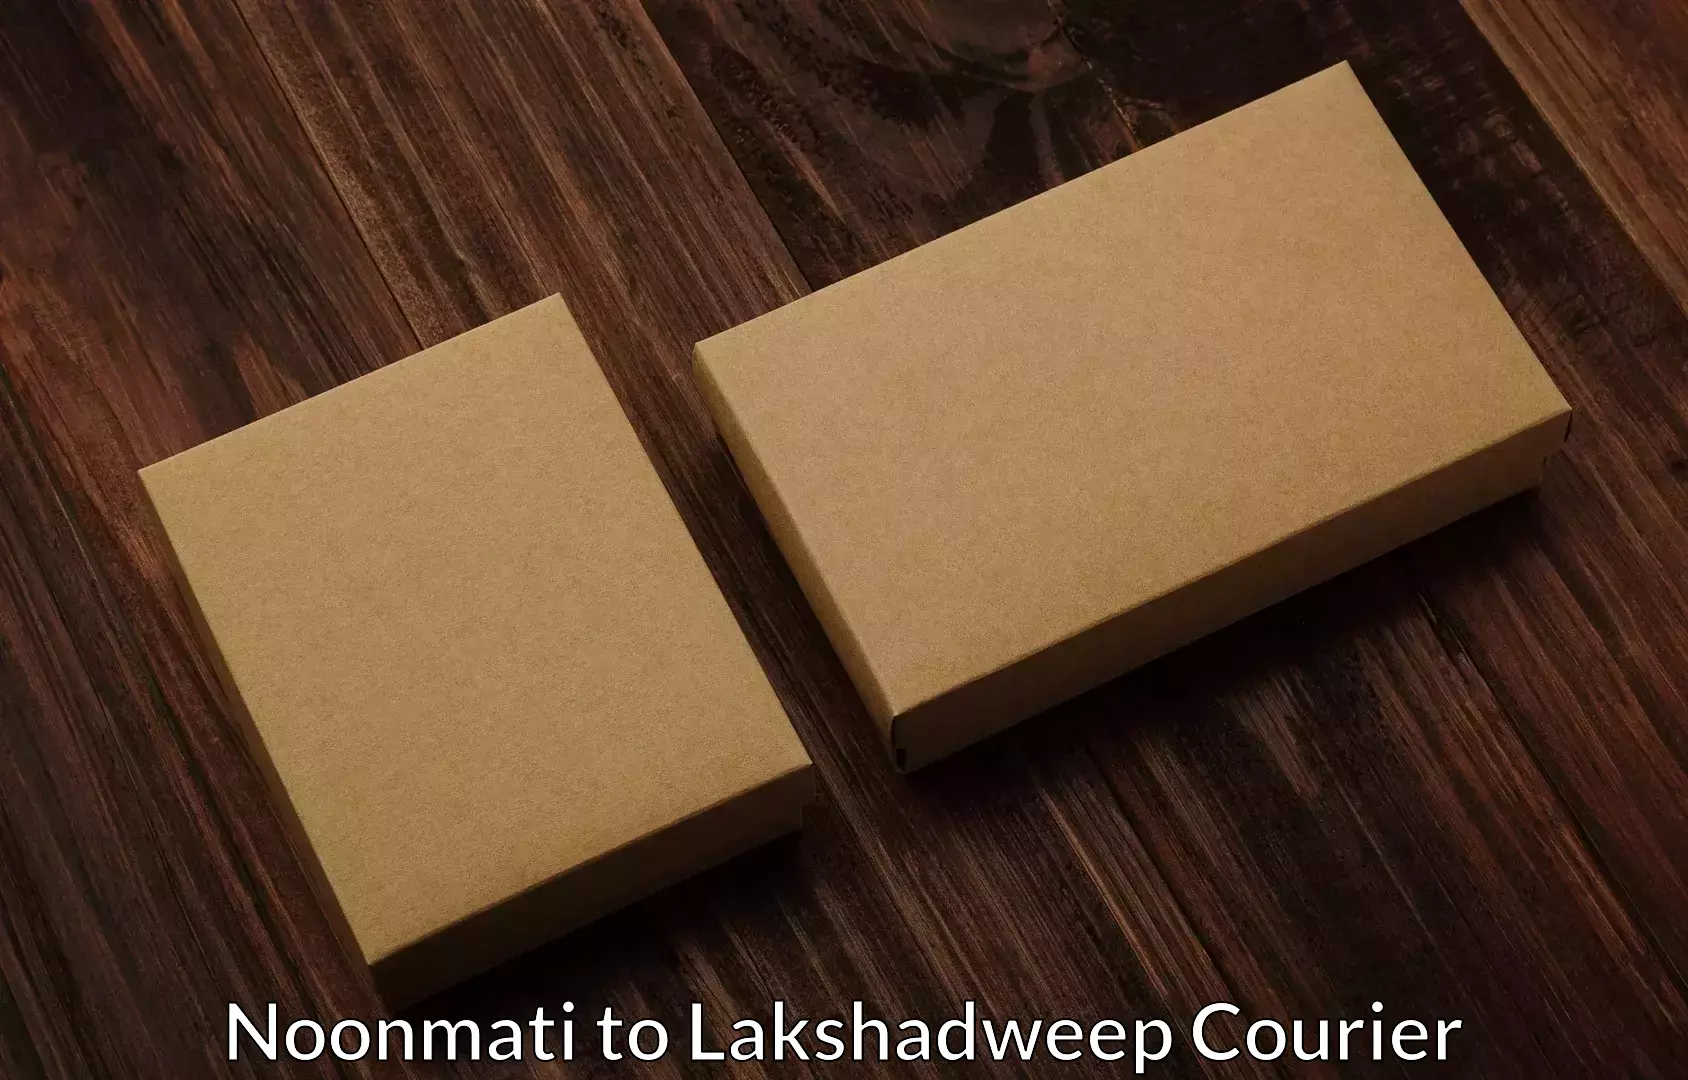 Trusted moving company Noonmati to Lakshadweep